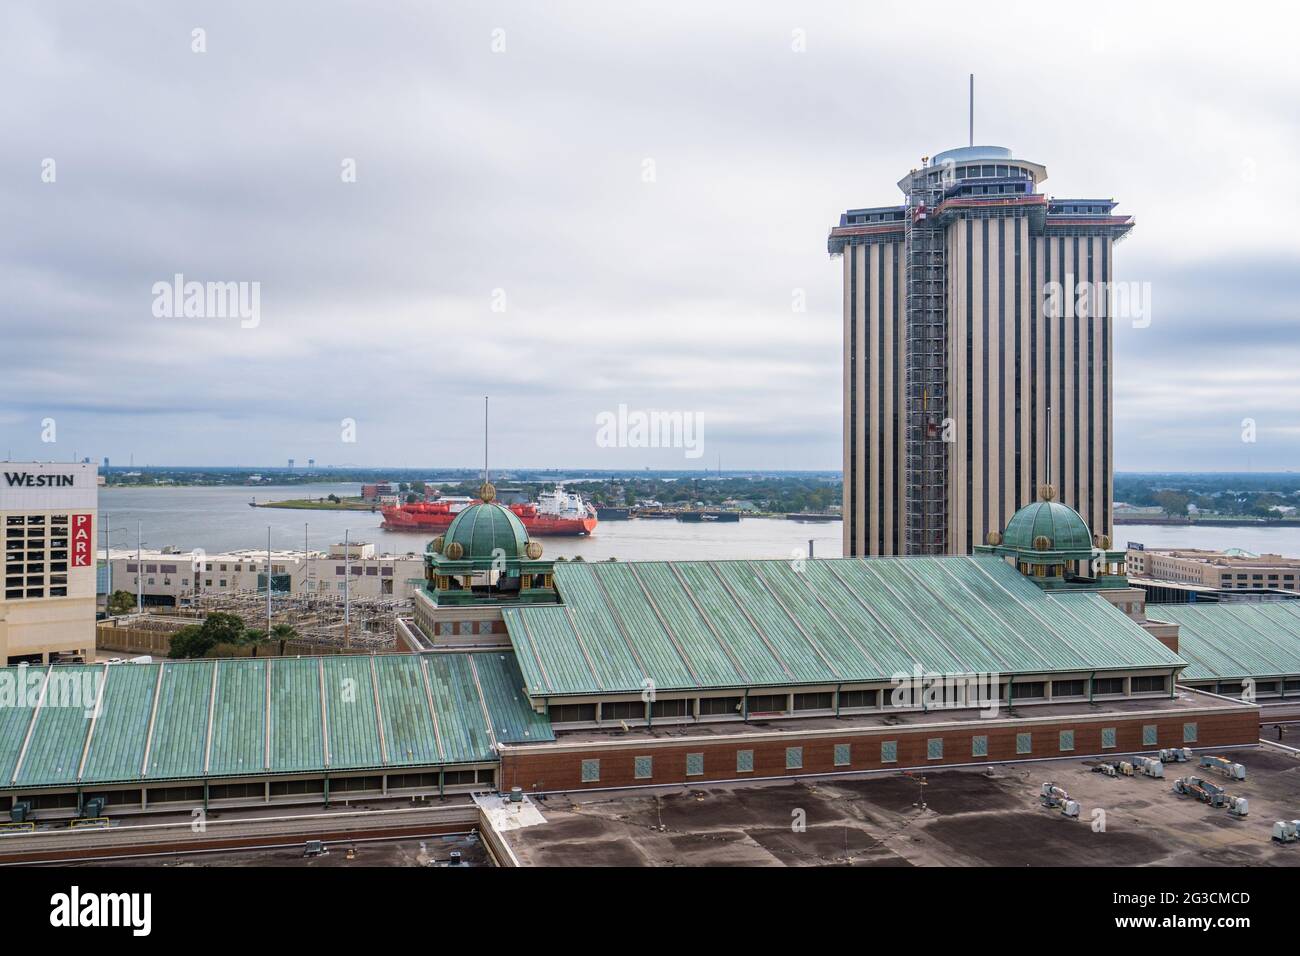 NEW ORLEANS, LA - OCTOBER 27, 2020: International Trade Mart Building, Roof of Harrah's Casino and Crescent of Mississippi River with Freighter Stock Photo